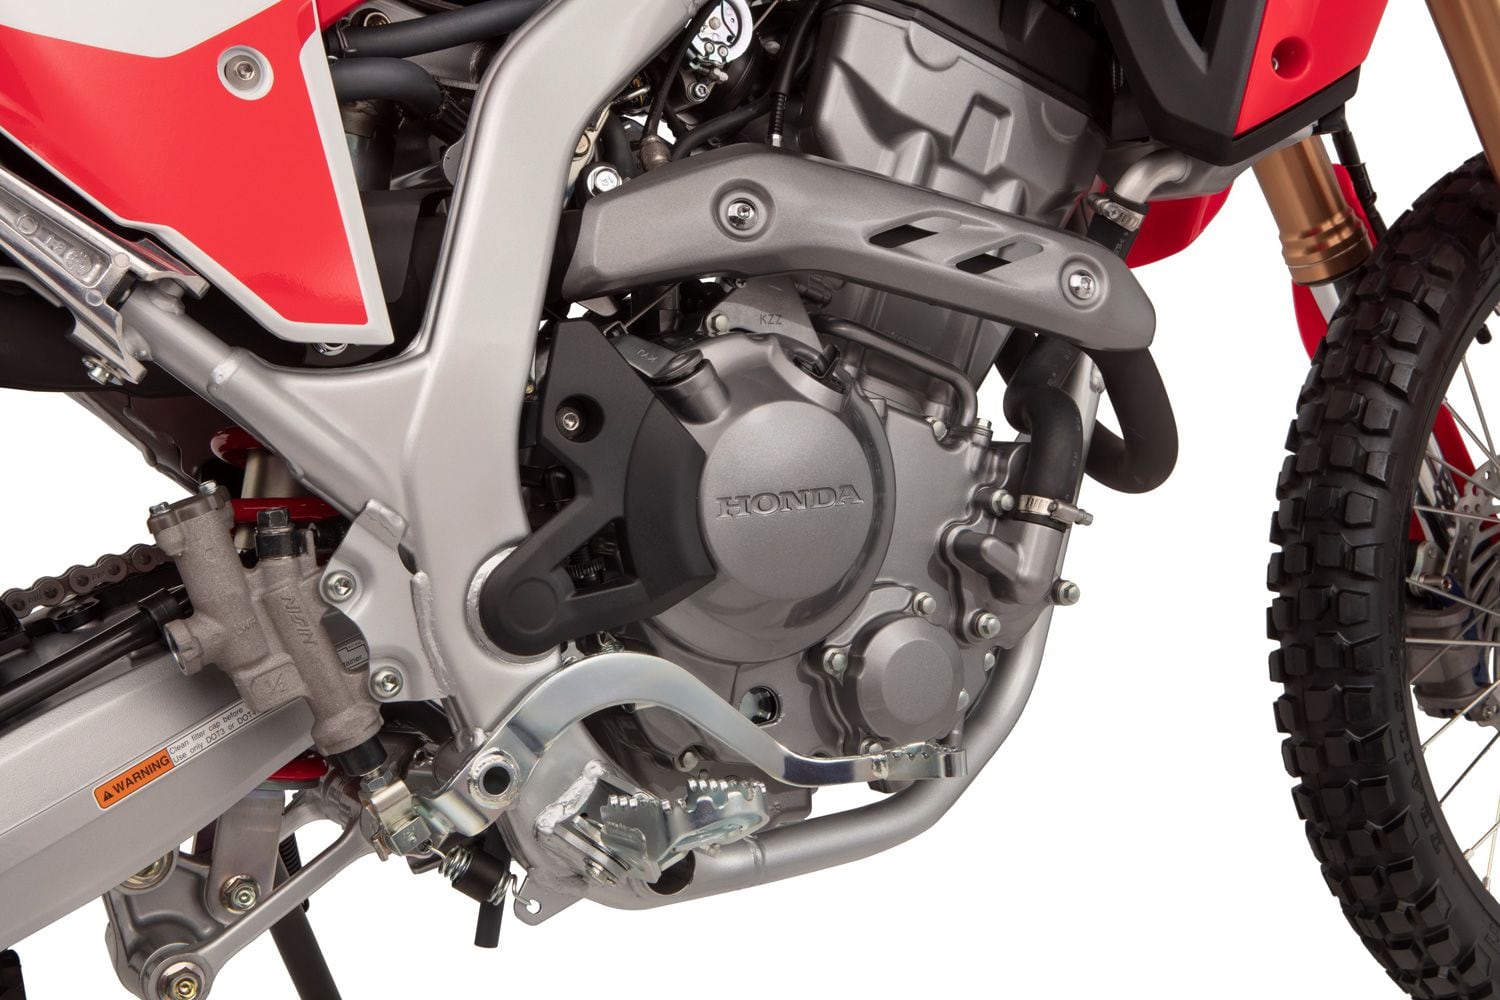 Honda has increased displacement of the CRF300L and CRF300L Rally by increasing the stroke by 8mm.